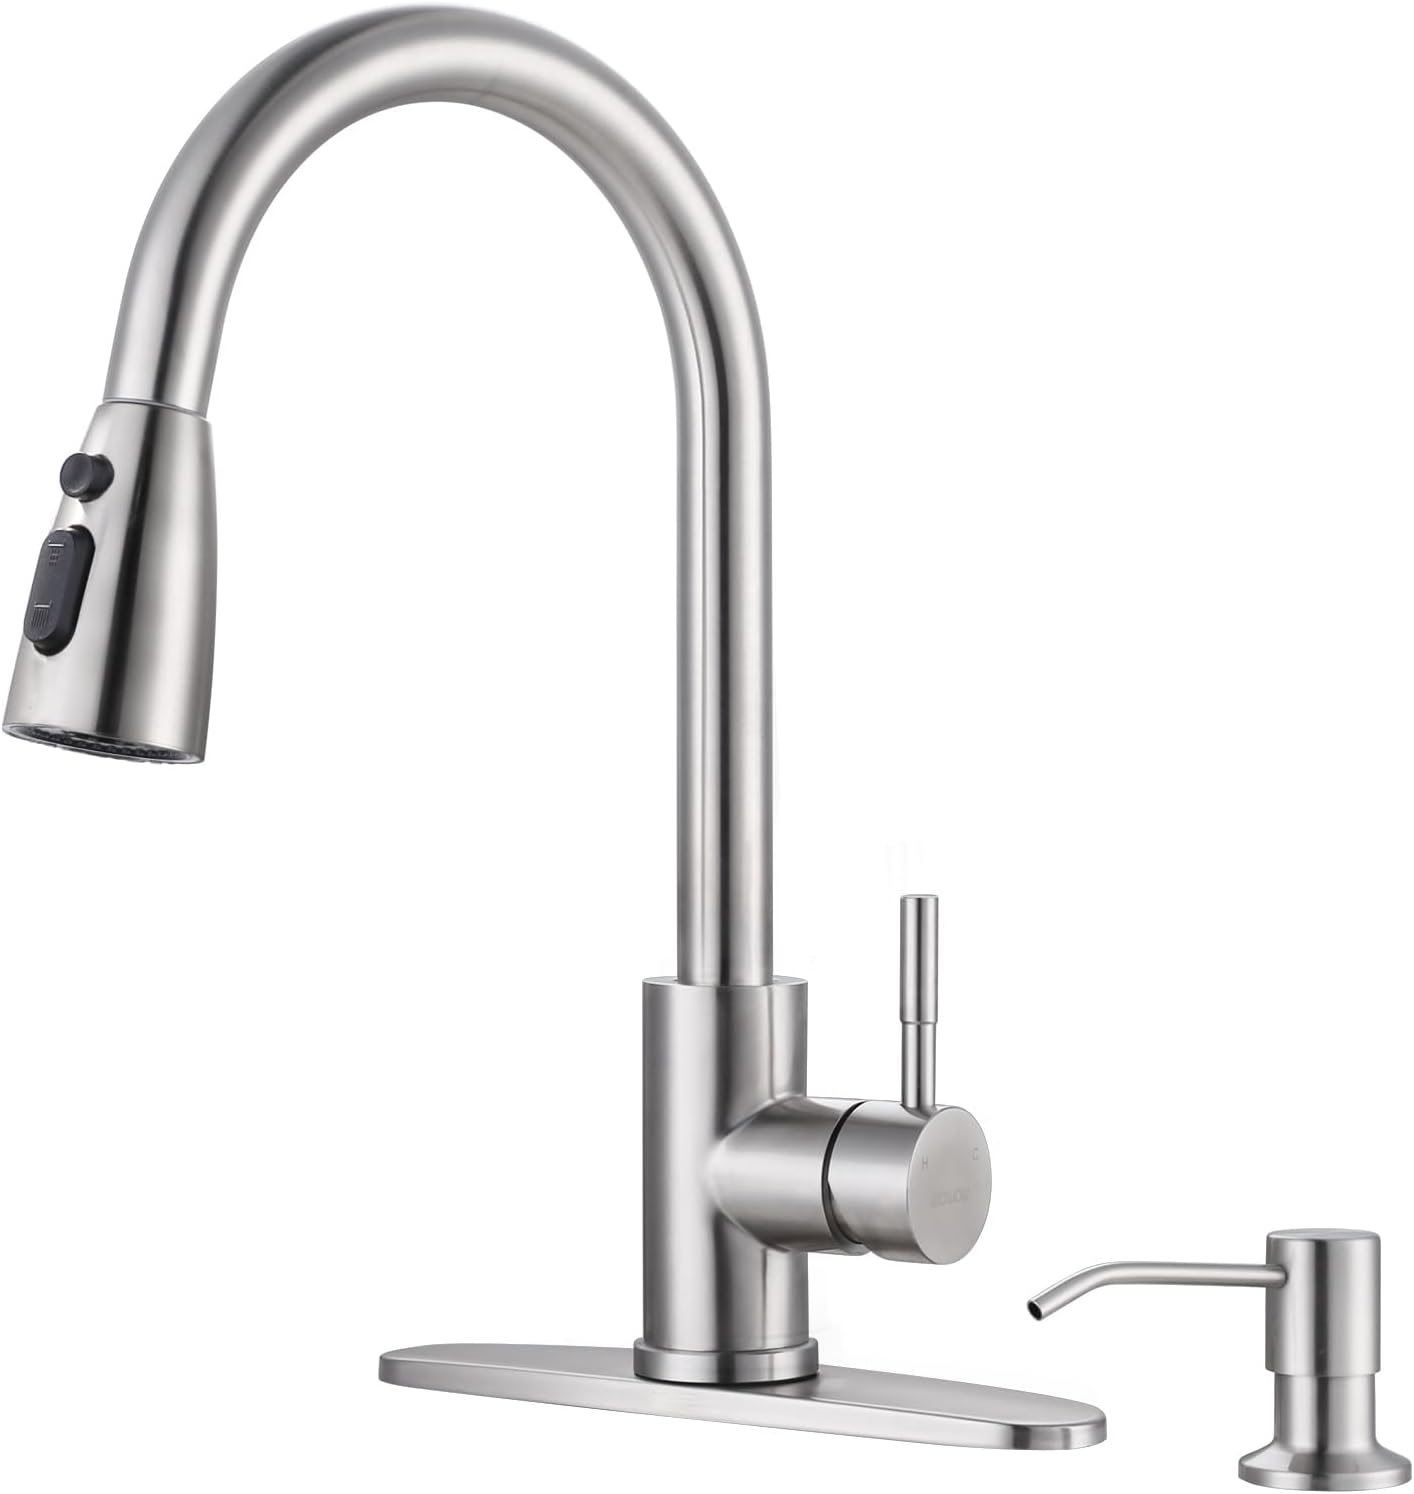 WOWOW Kitchen Sink Faucet with Soap Dispenser, Stainless Steel Pull Down Kitchen Faucet Brushed Nickel Utility Sink Faucet Single Handle High Arc Kitchen Tap for Sink, RV, Laundry, Bar